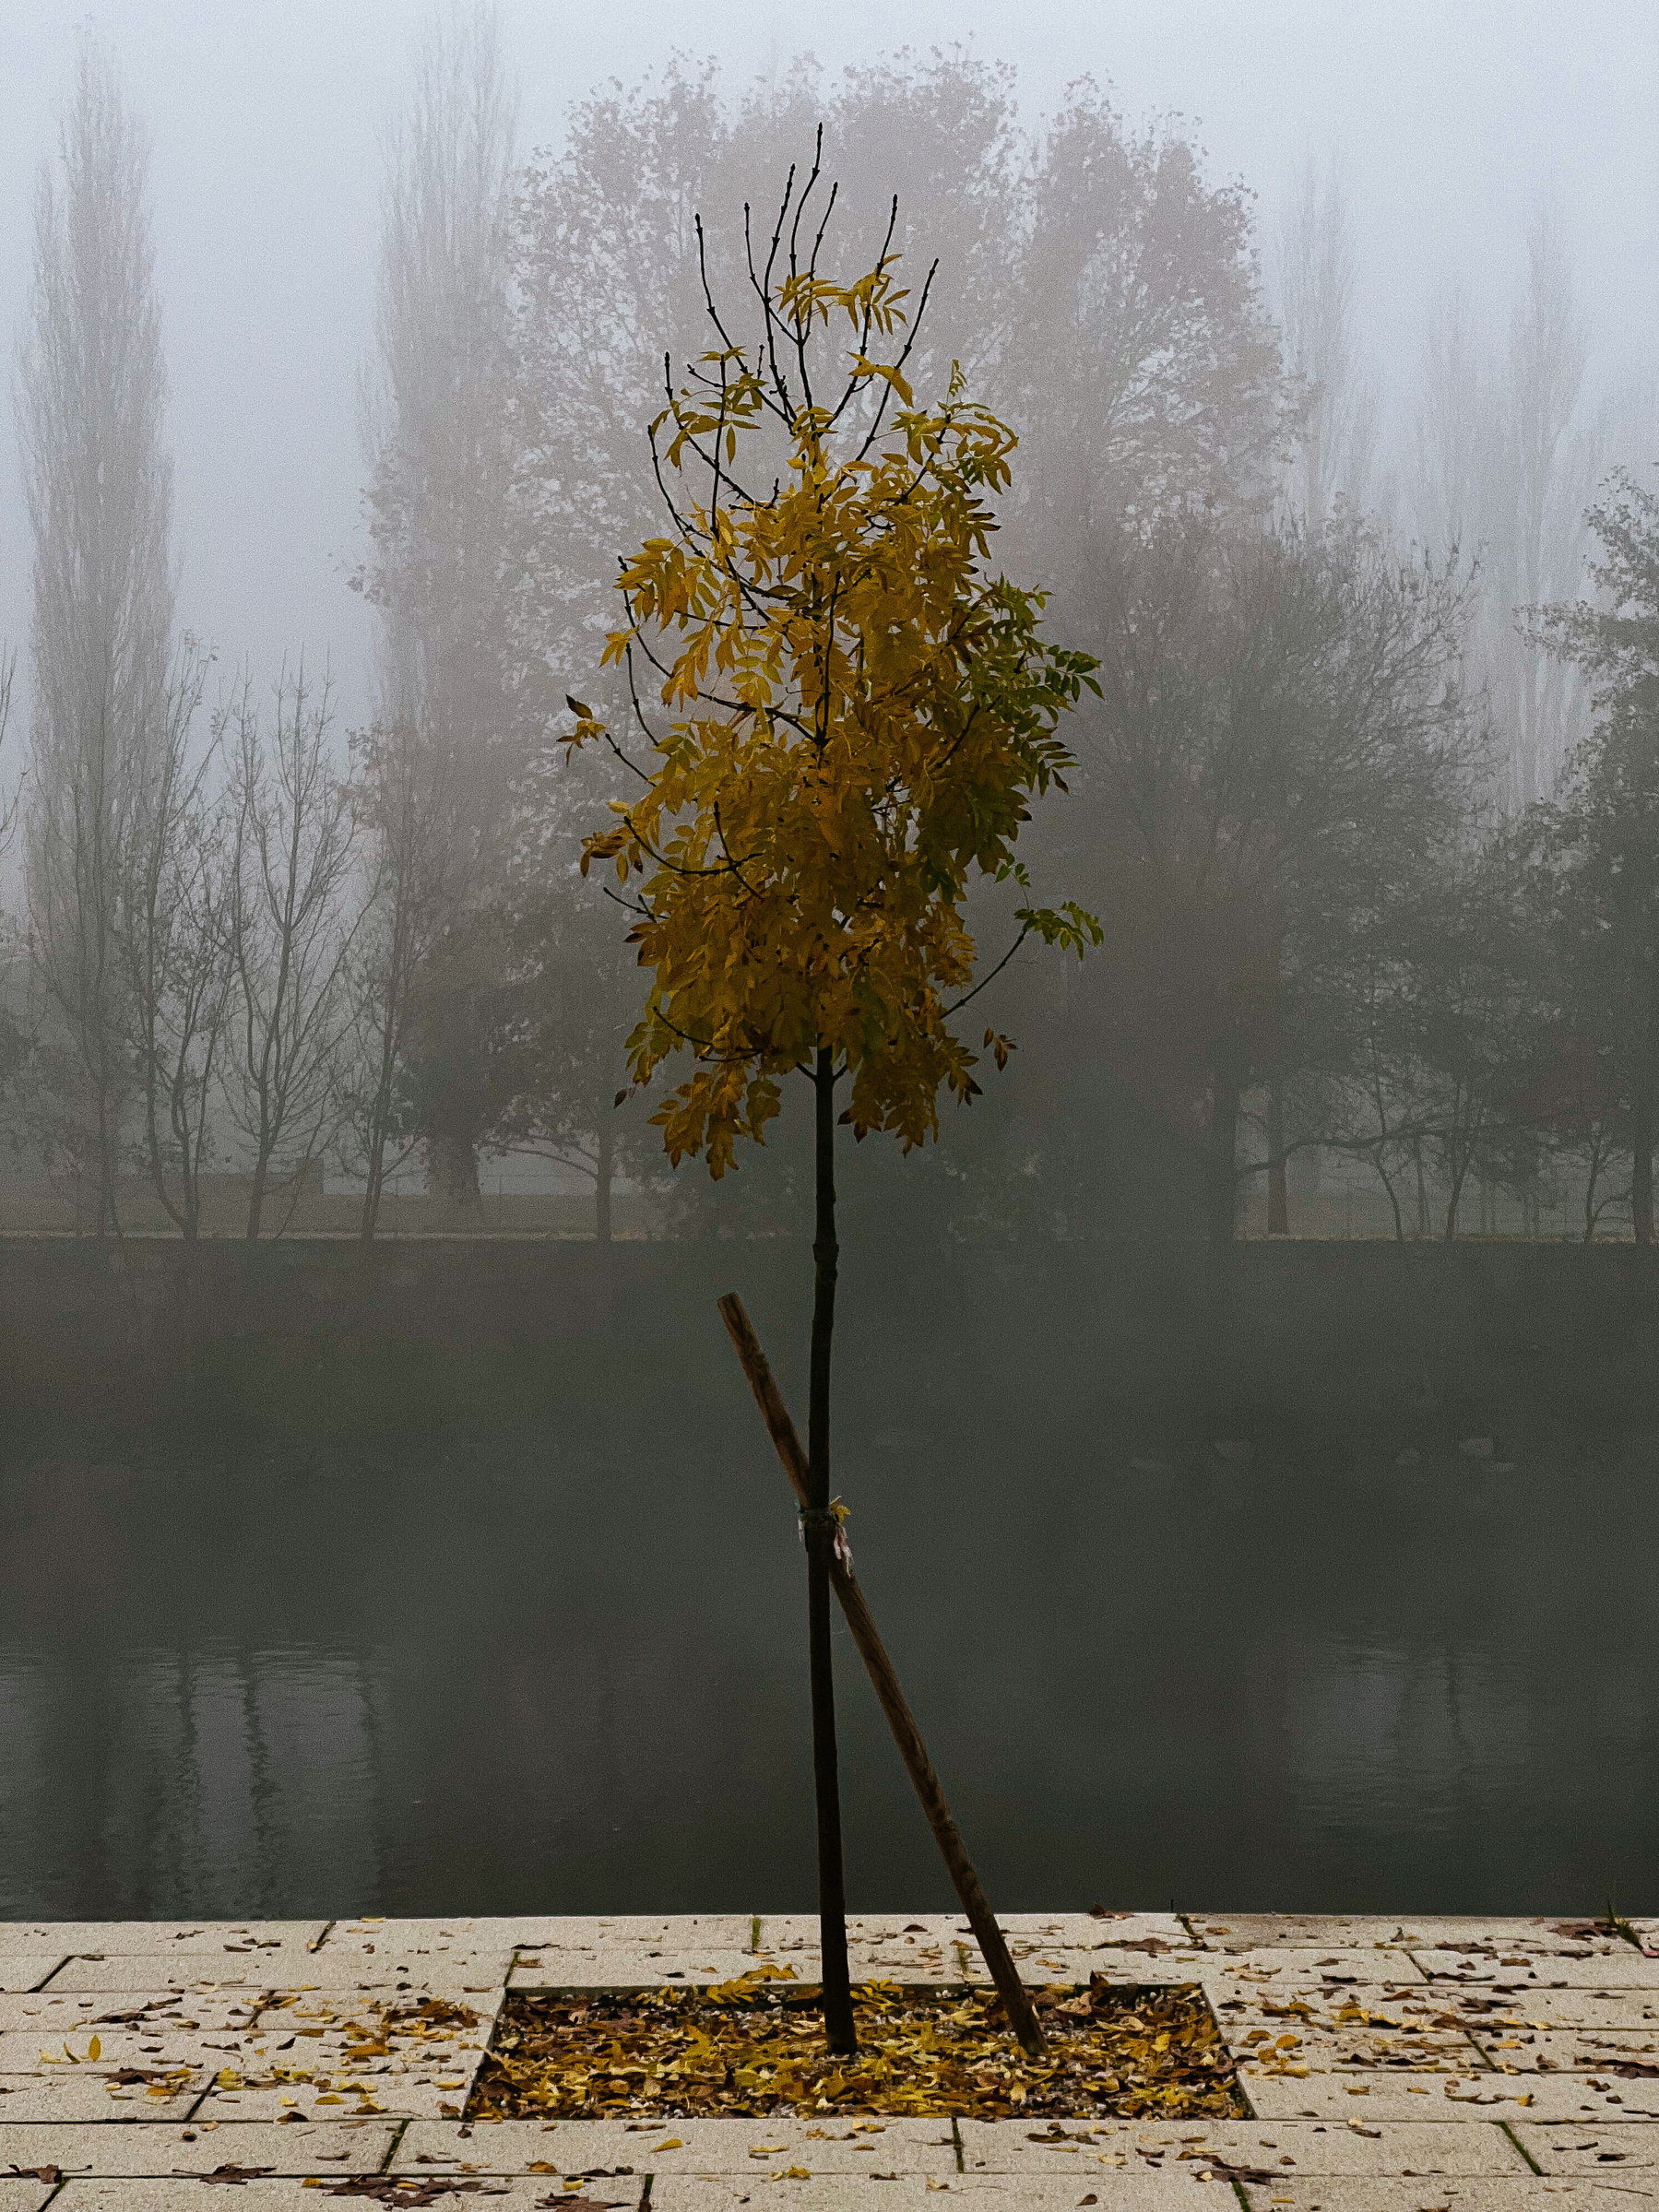 A lone tree in a misty morning by the river.